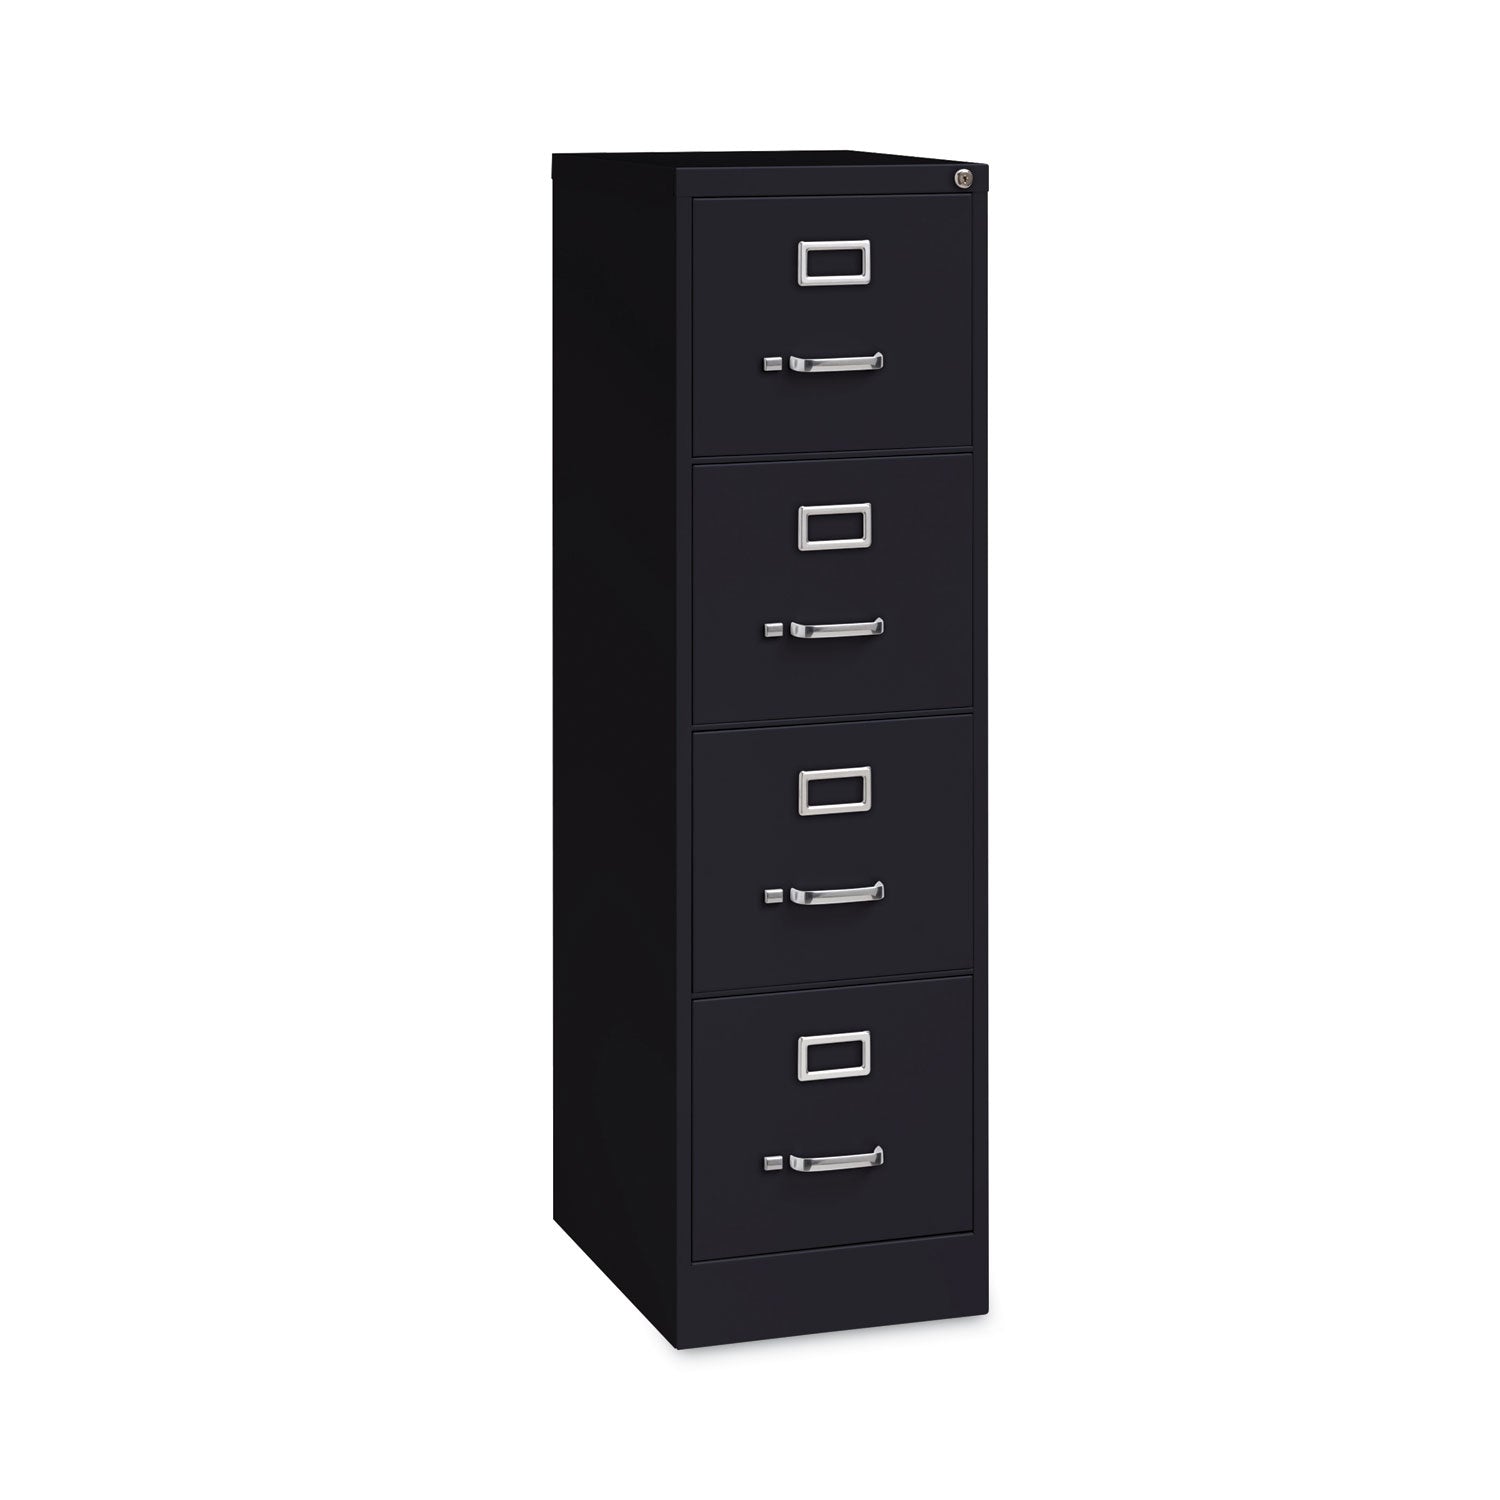 vertical-letter-file-cabinet-4-letter-size-file-drawers-black-15-x-22-x-52_hid17892 - 3